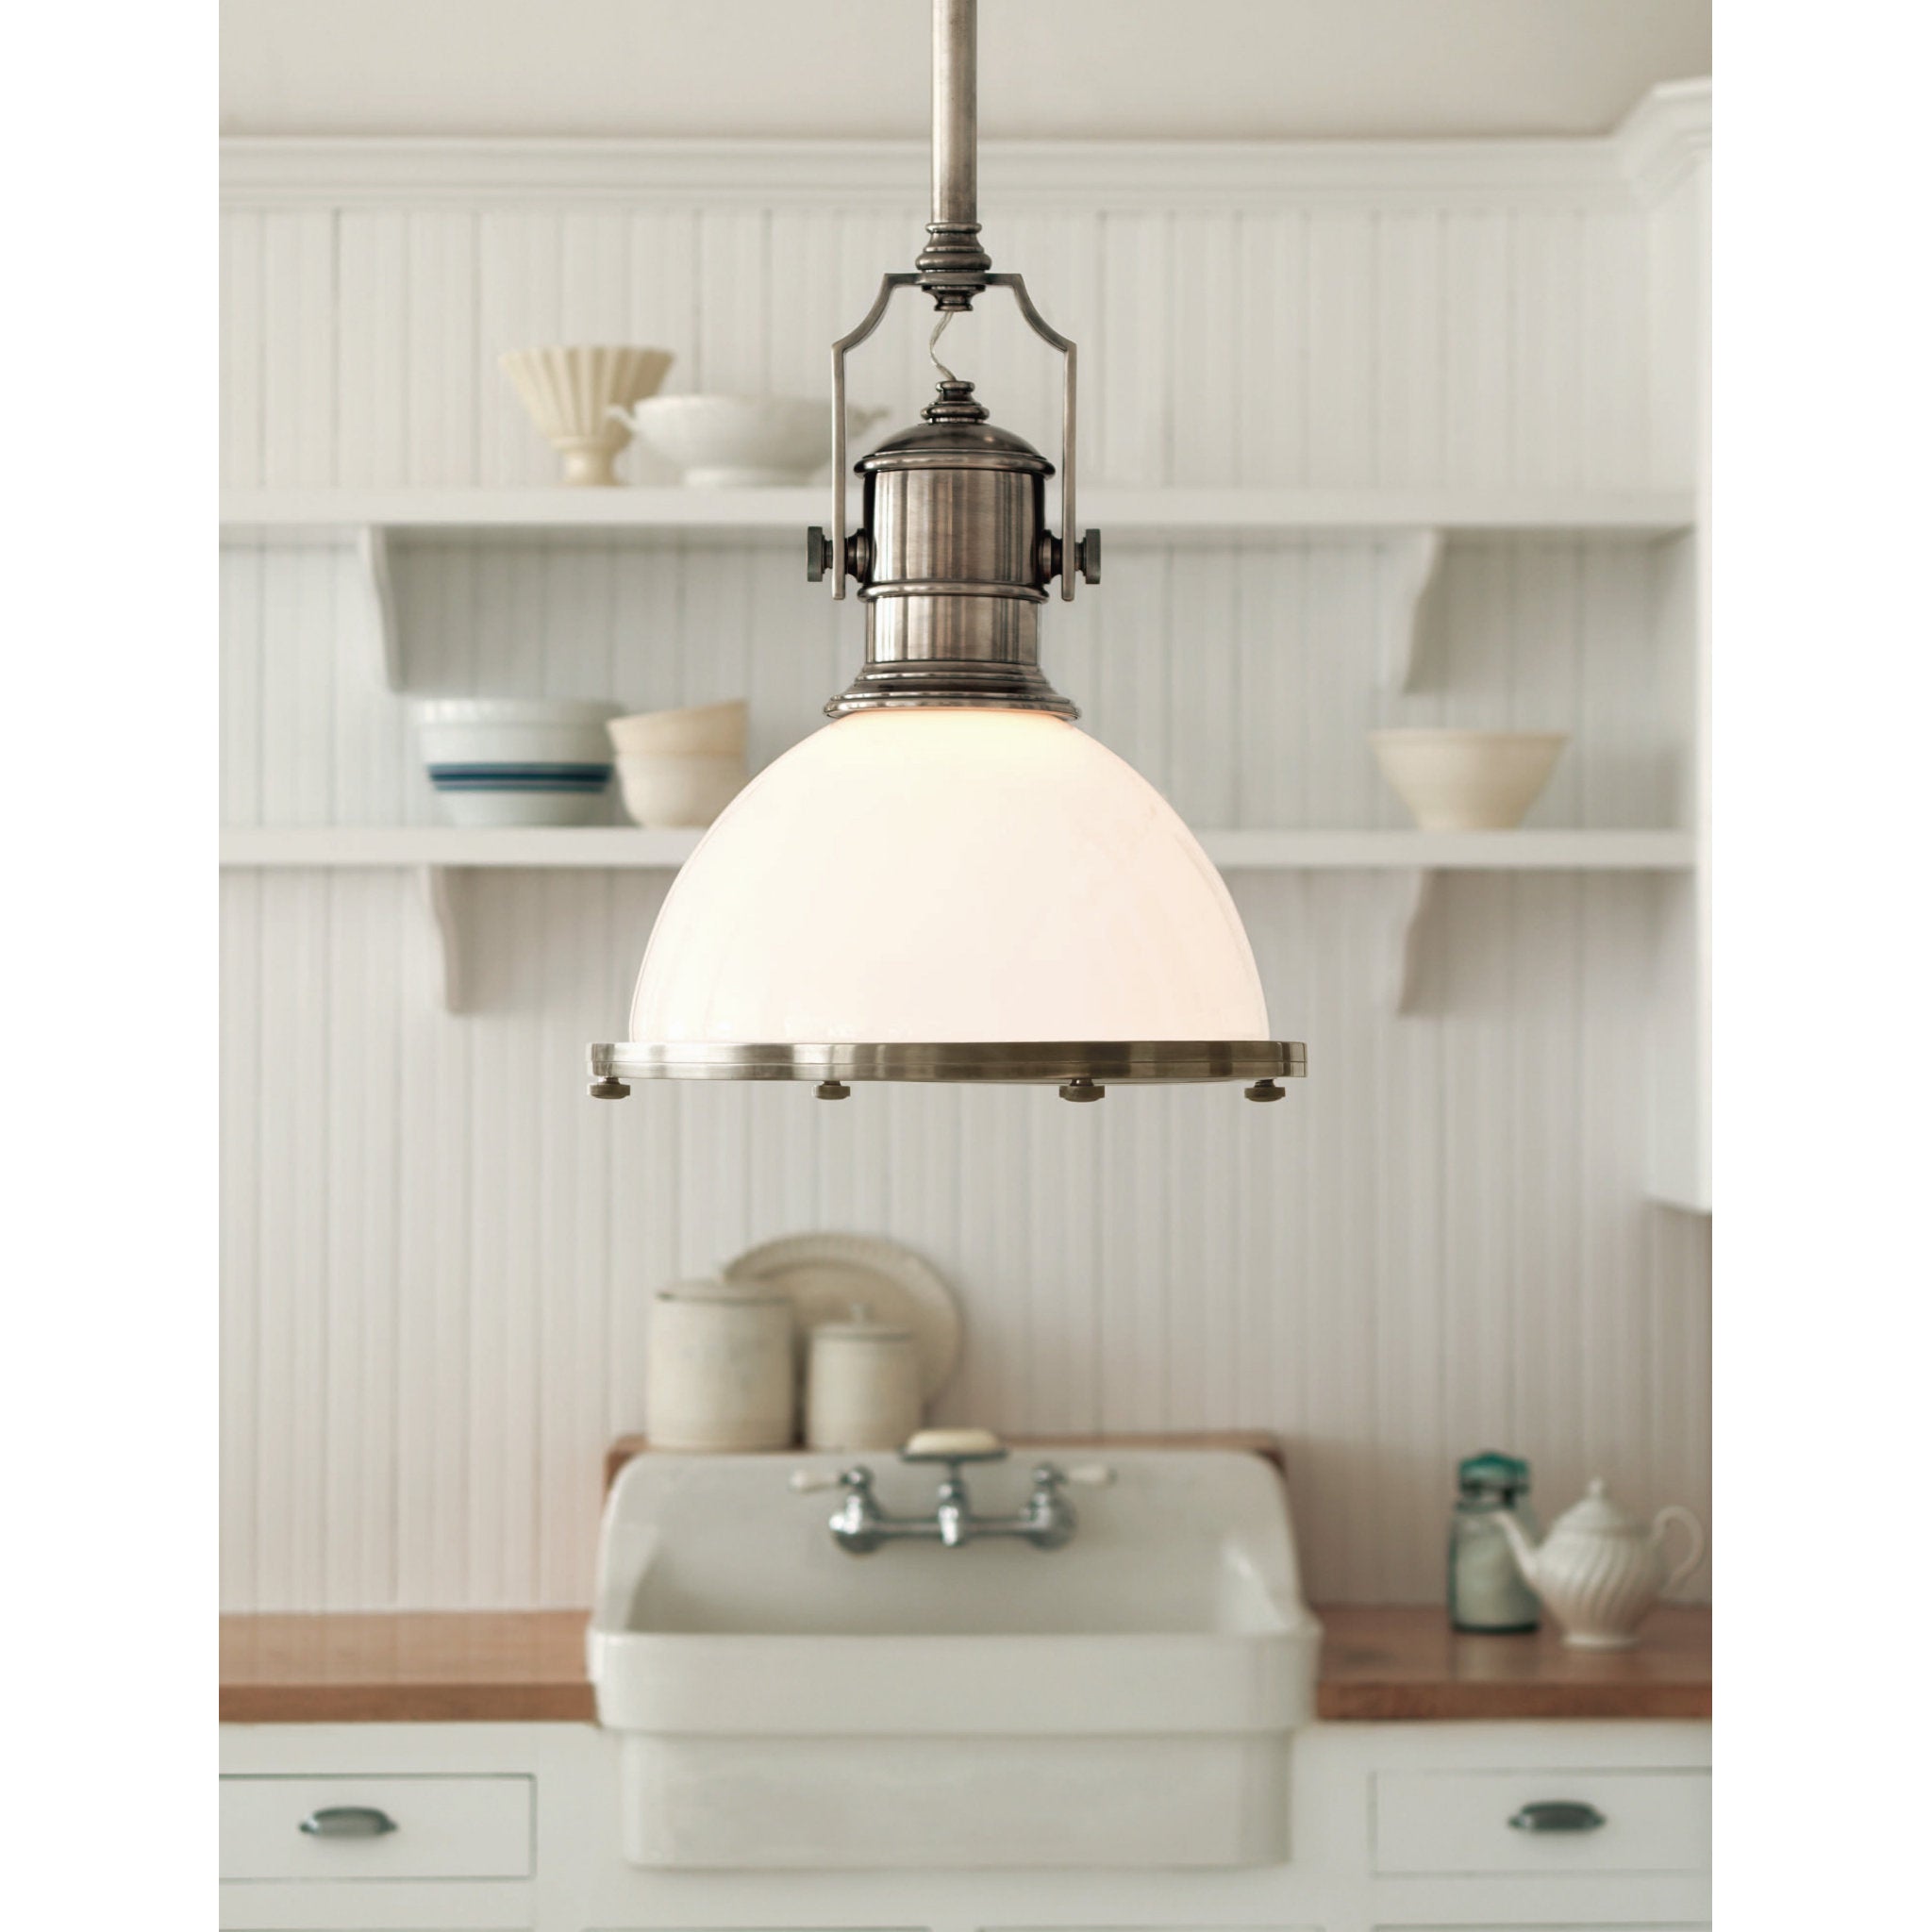 Chapman & Myers Country Industrial Small Pendant in Polished Nickel wi